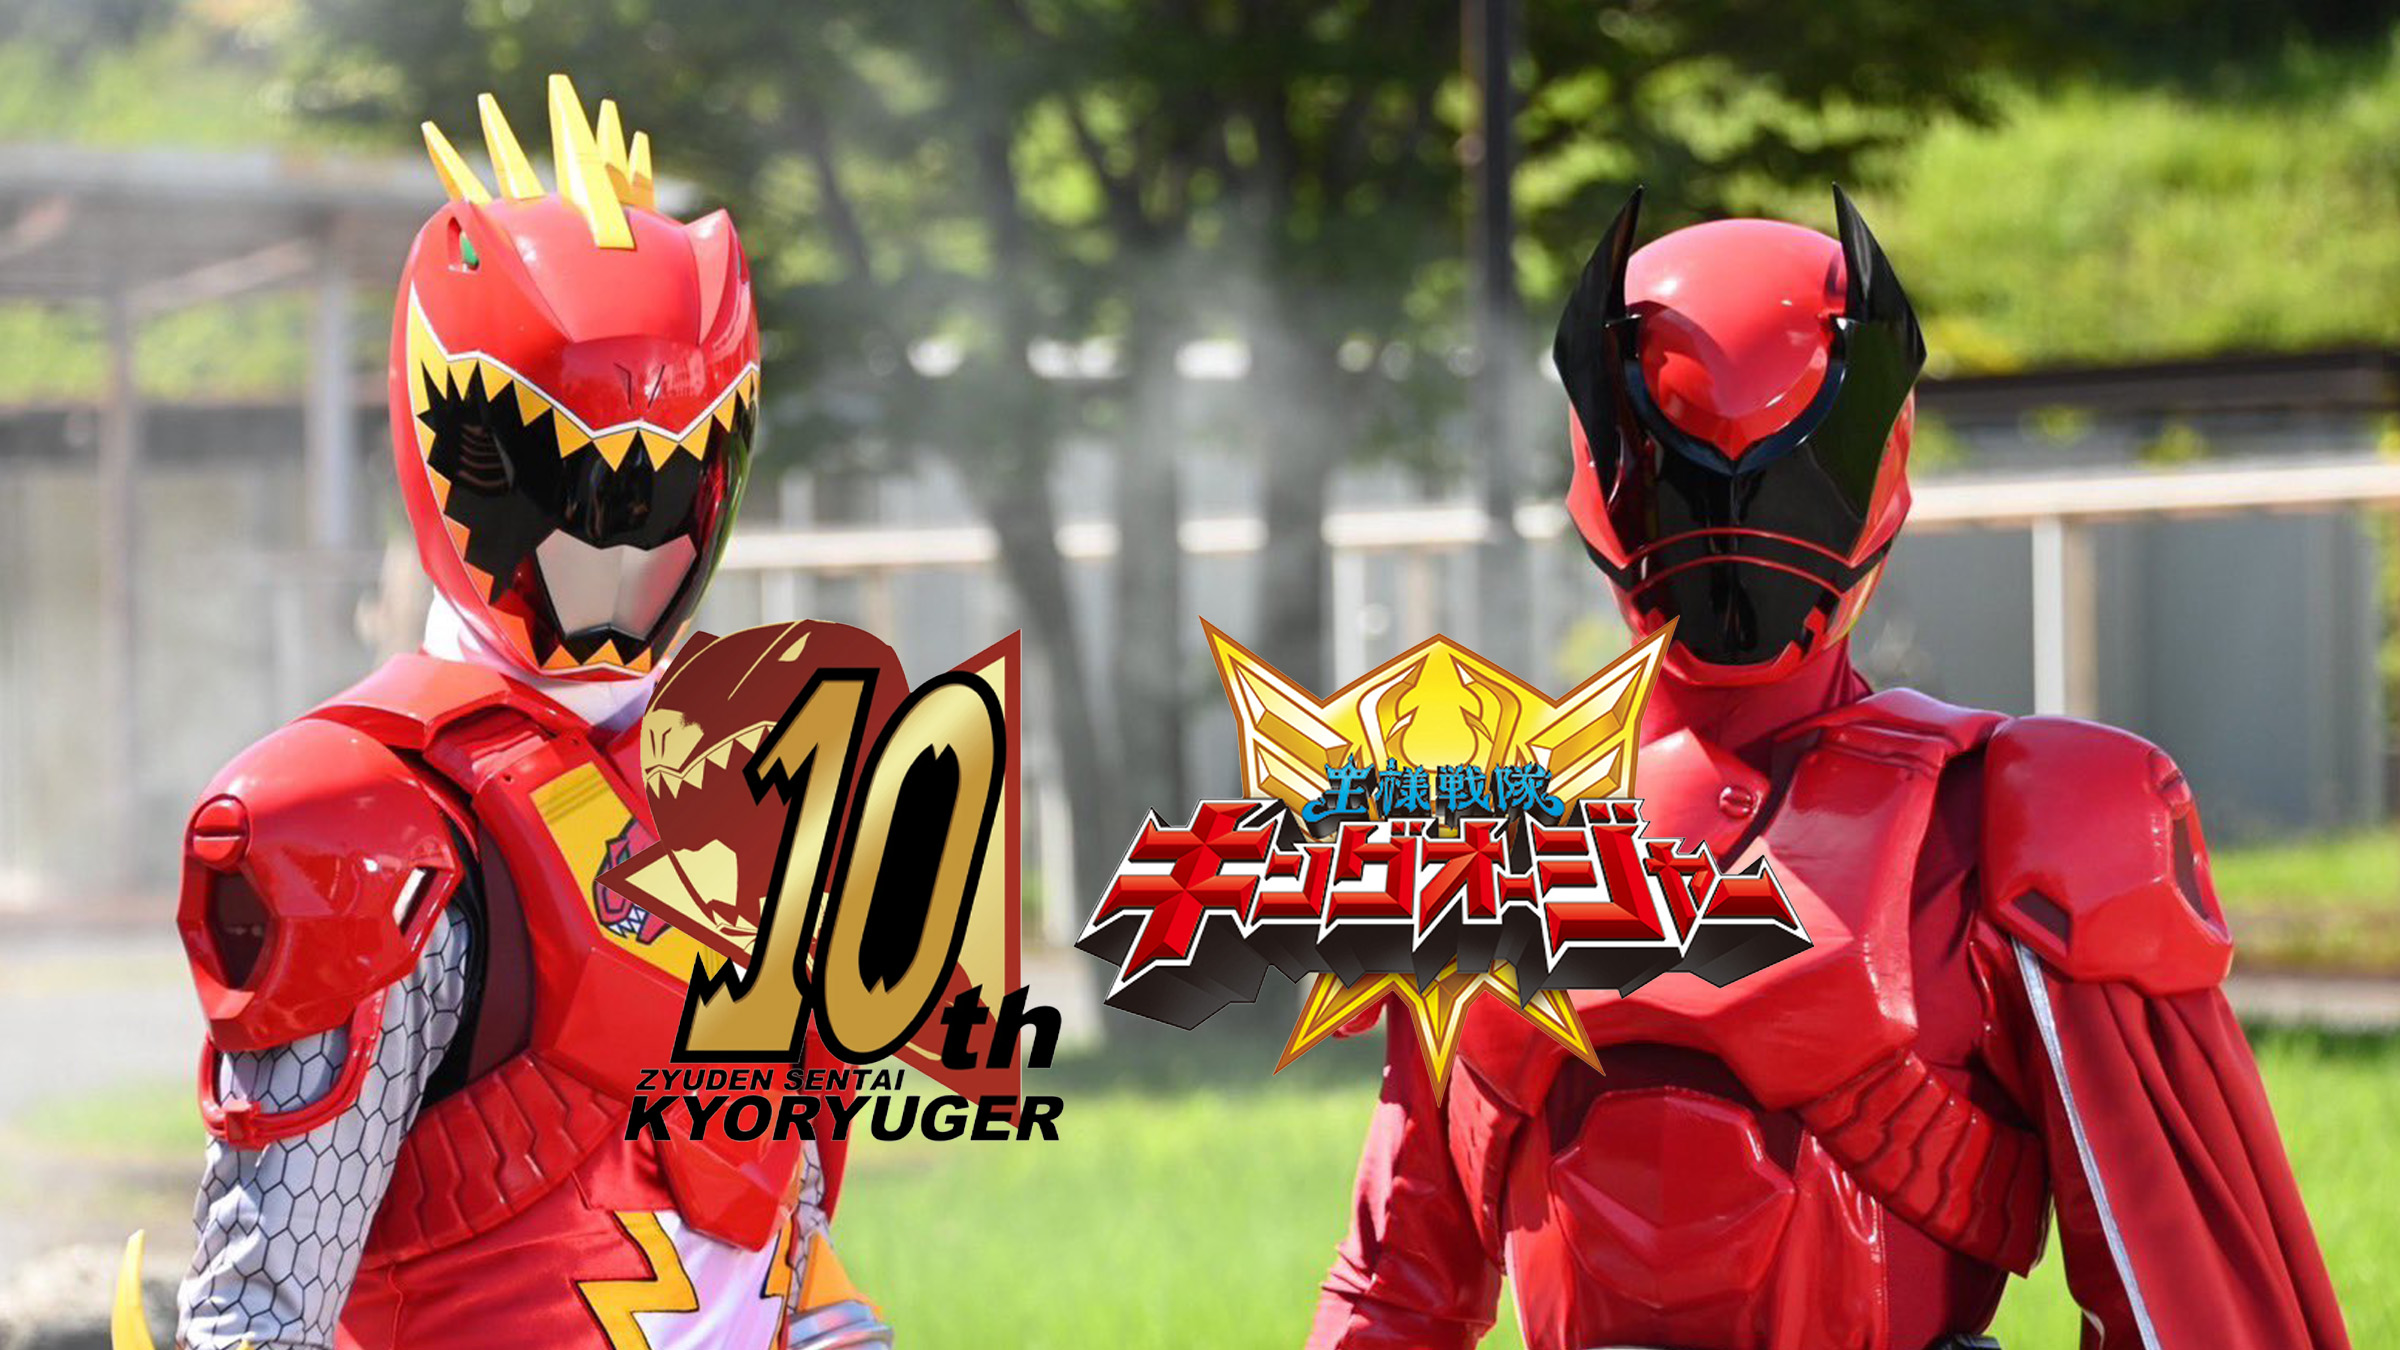 KingOhger: King Kyoryu Red’s Jaw-Dropping Debut Fully Revealed!